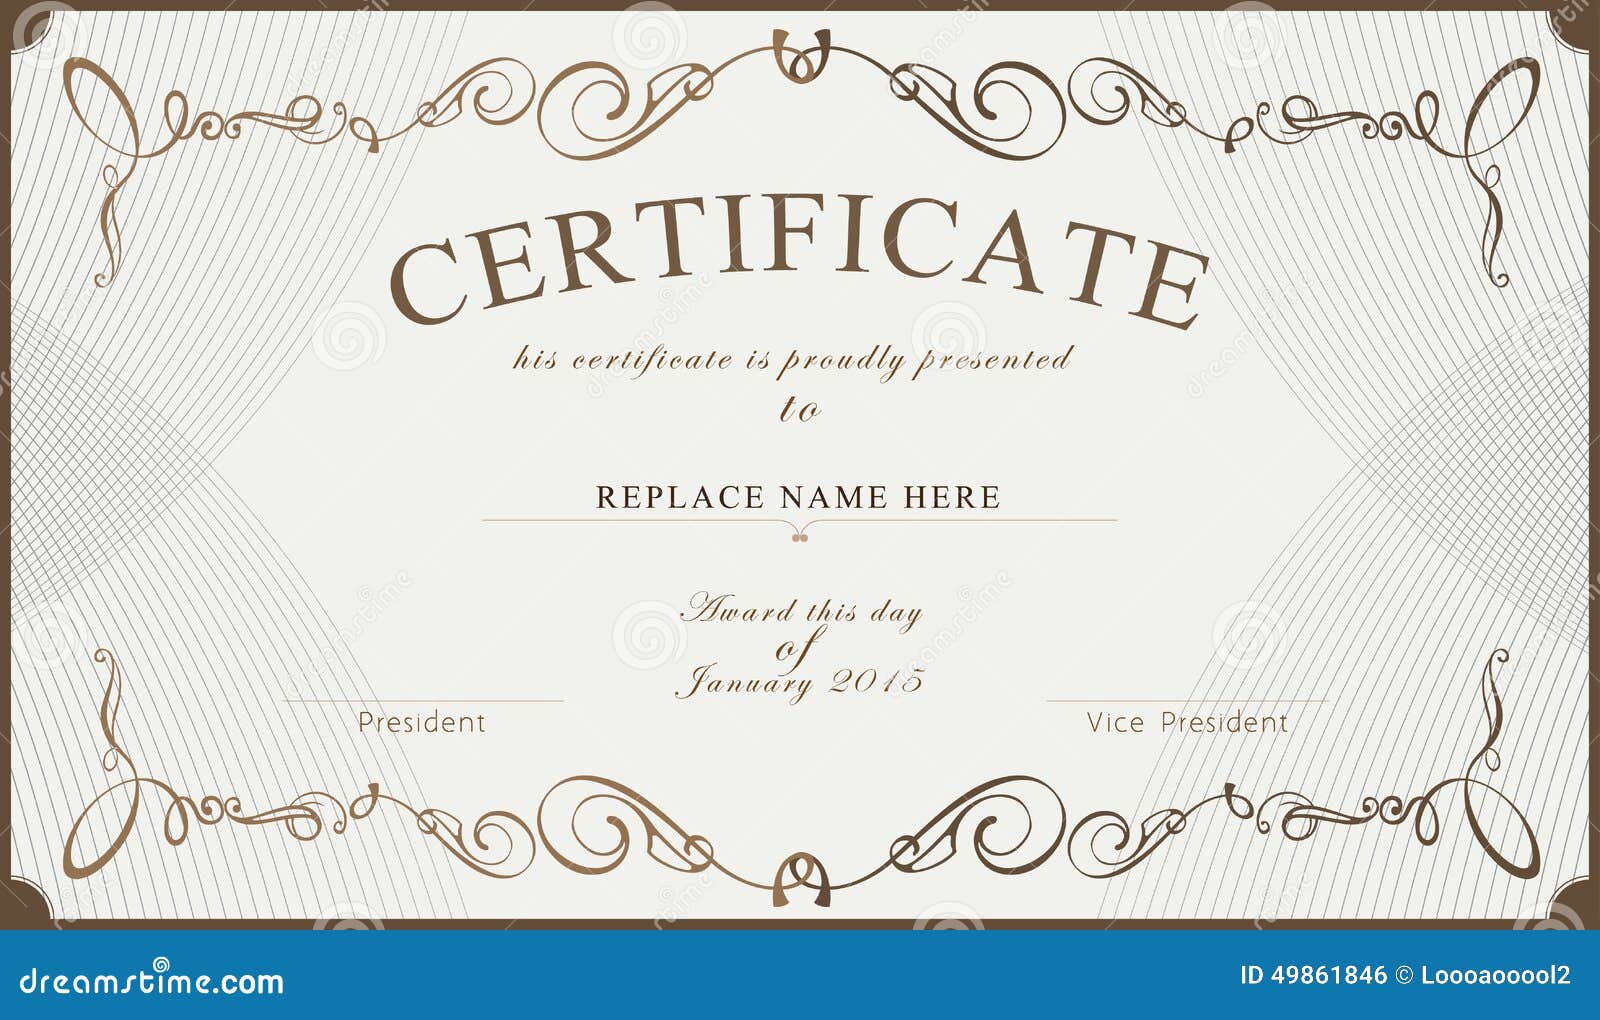 Certificate Template Without Border from thumbs.dreamstime.com